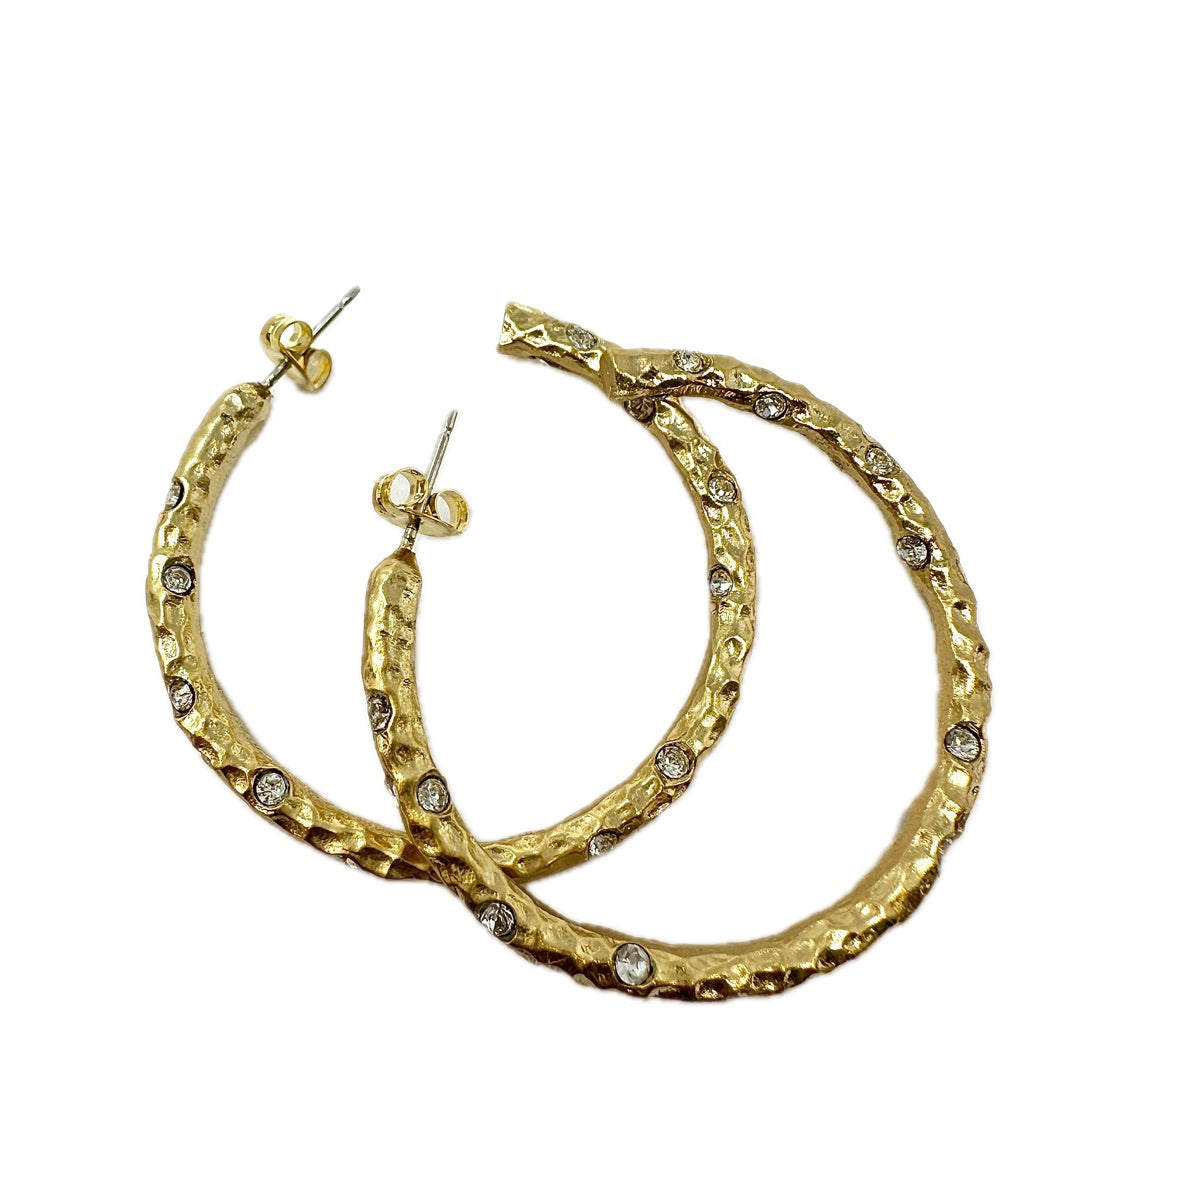 TAT 2 Gold Pavia Hoops with Crystals Earrings